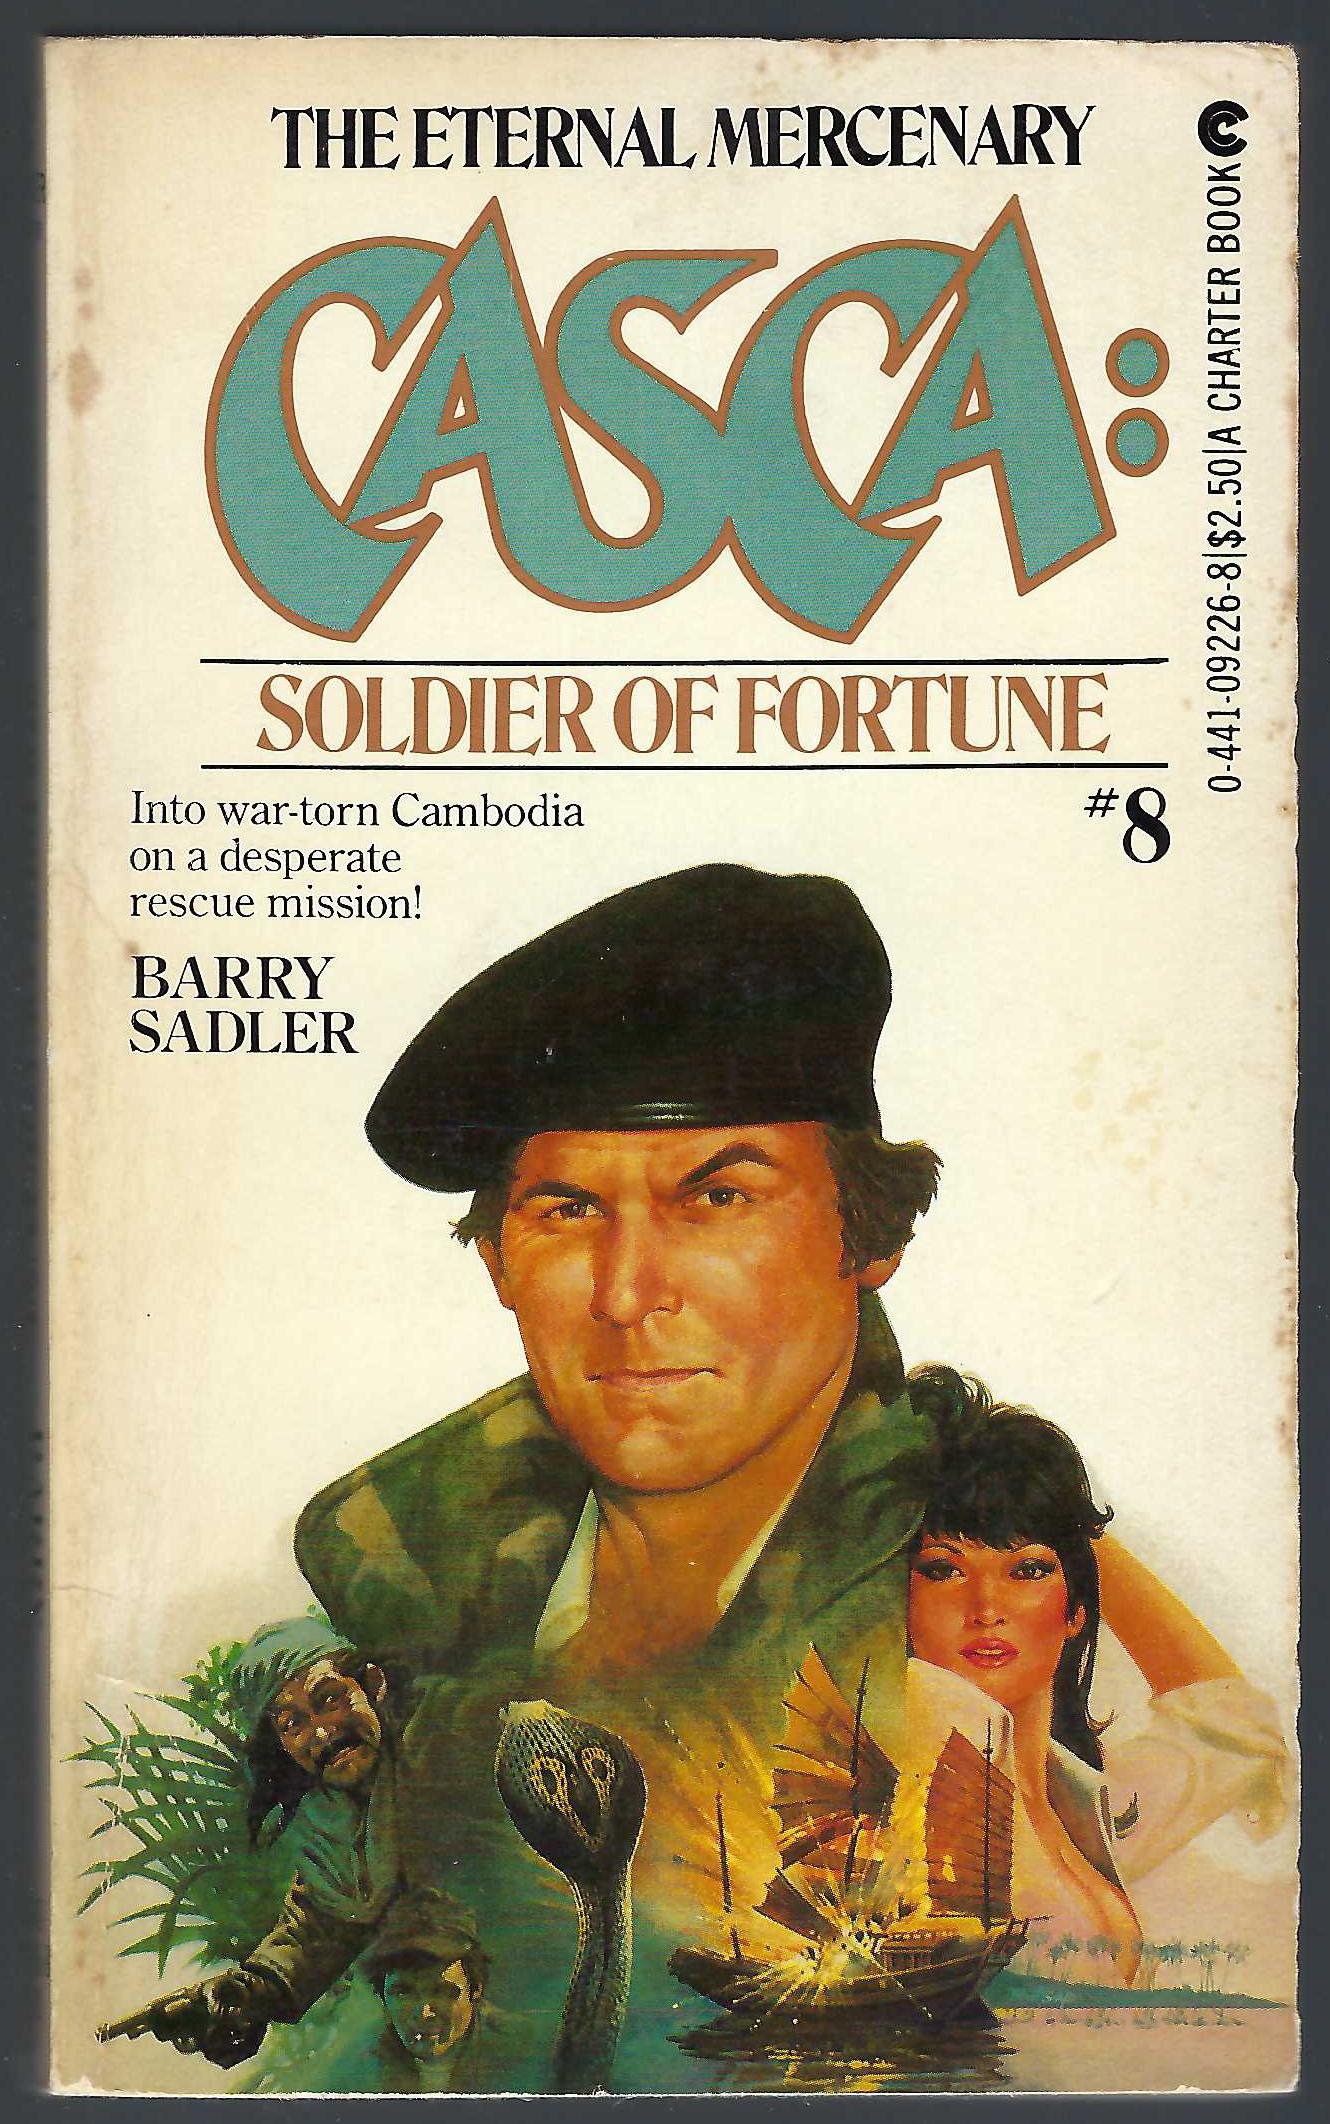 Soldier of Fortune (Casca #8) by Barry Sadler